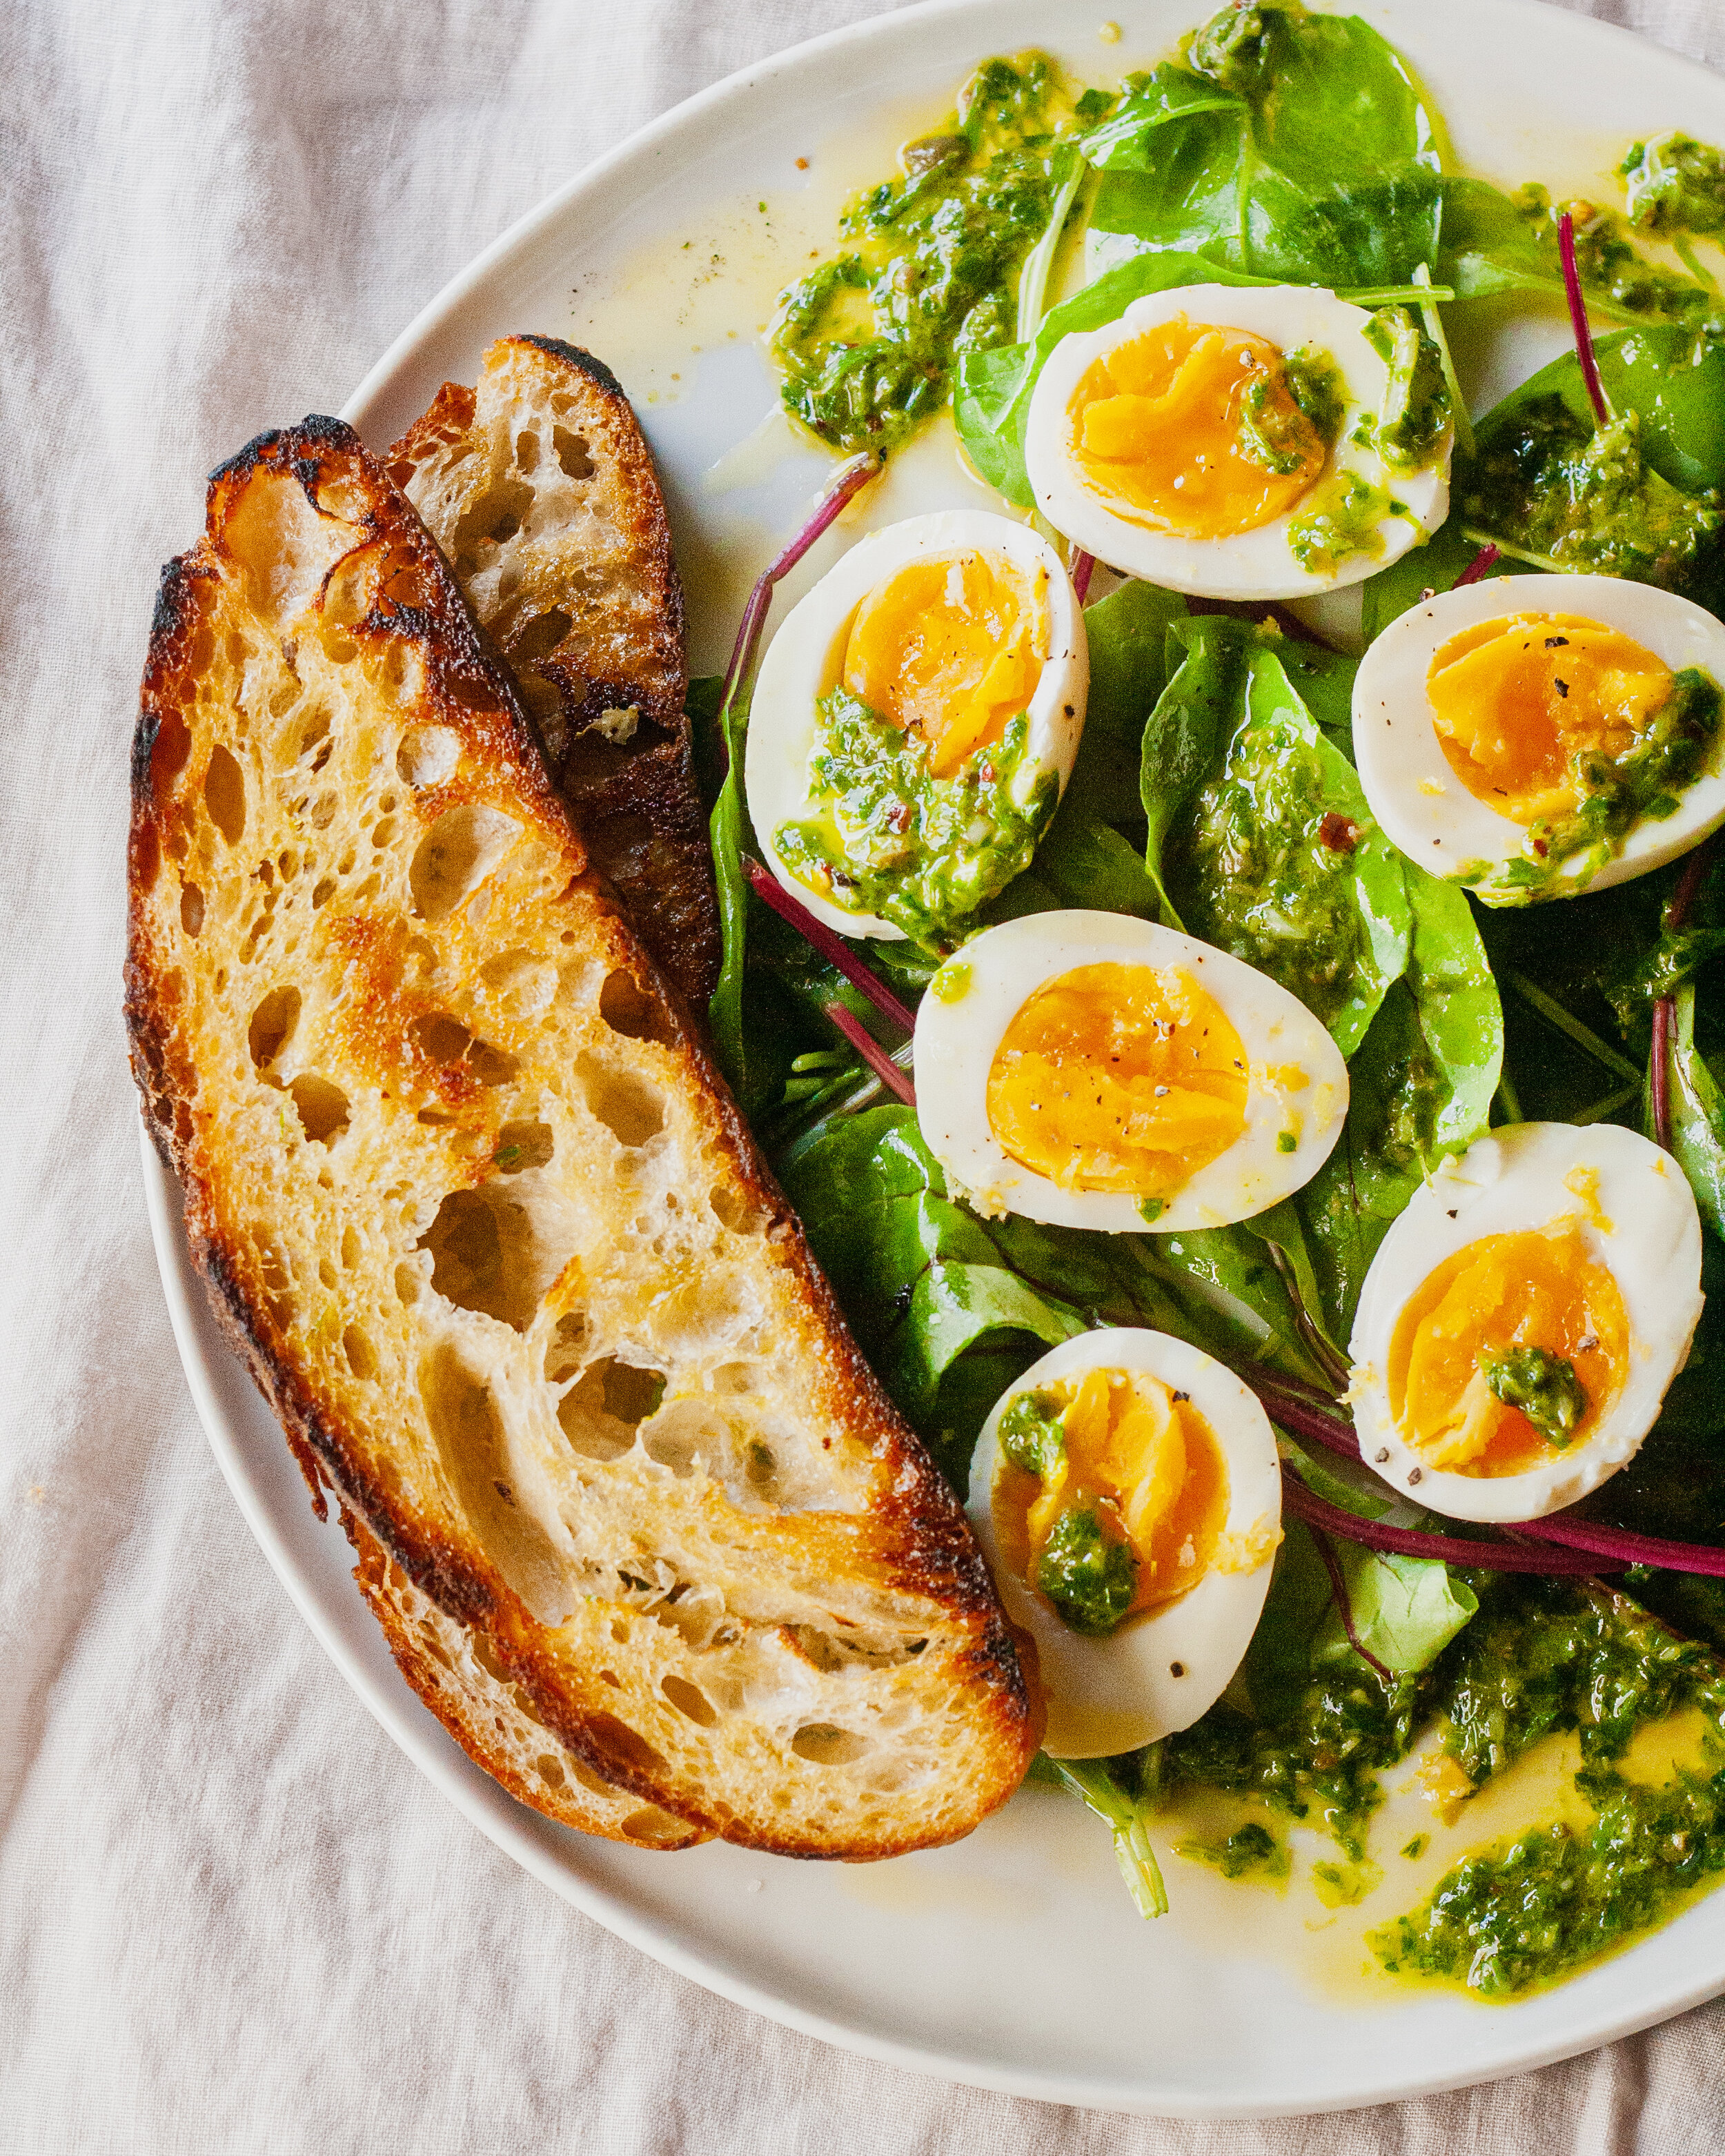 For Local Roots: Soft-Boiled Eggs with Spring Salsa Verde, Salad Greens, and Grilled Bread